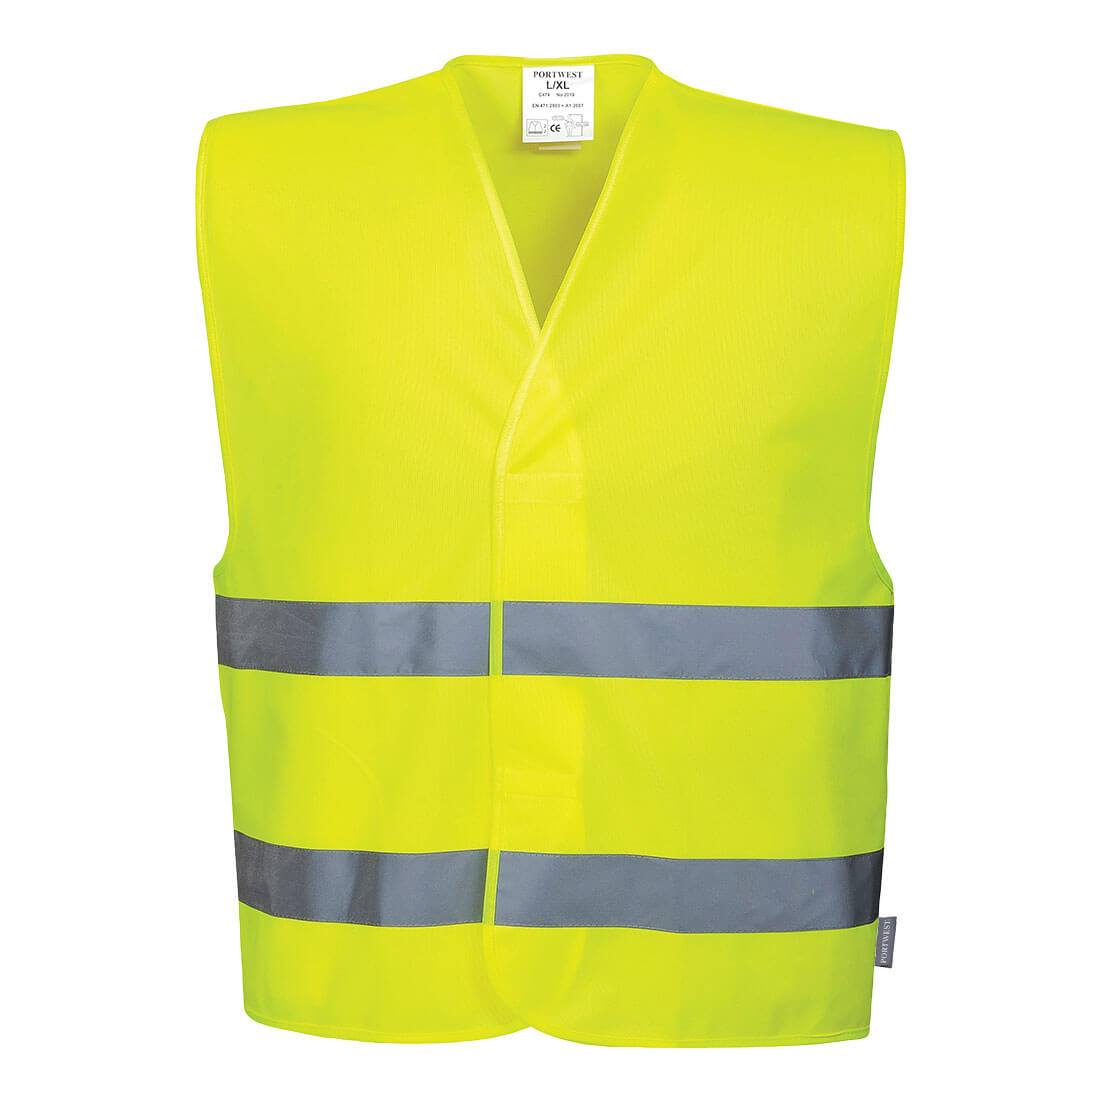 Image of Portwest Two Band Class 2 Hi Vis Waistcoat Yellow 2XL / 3XL